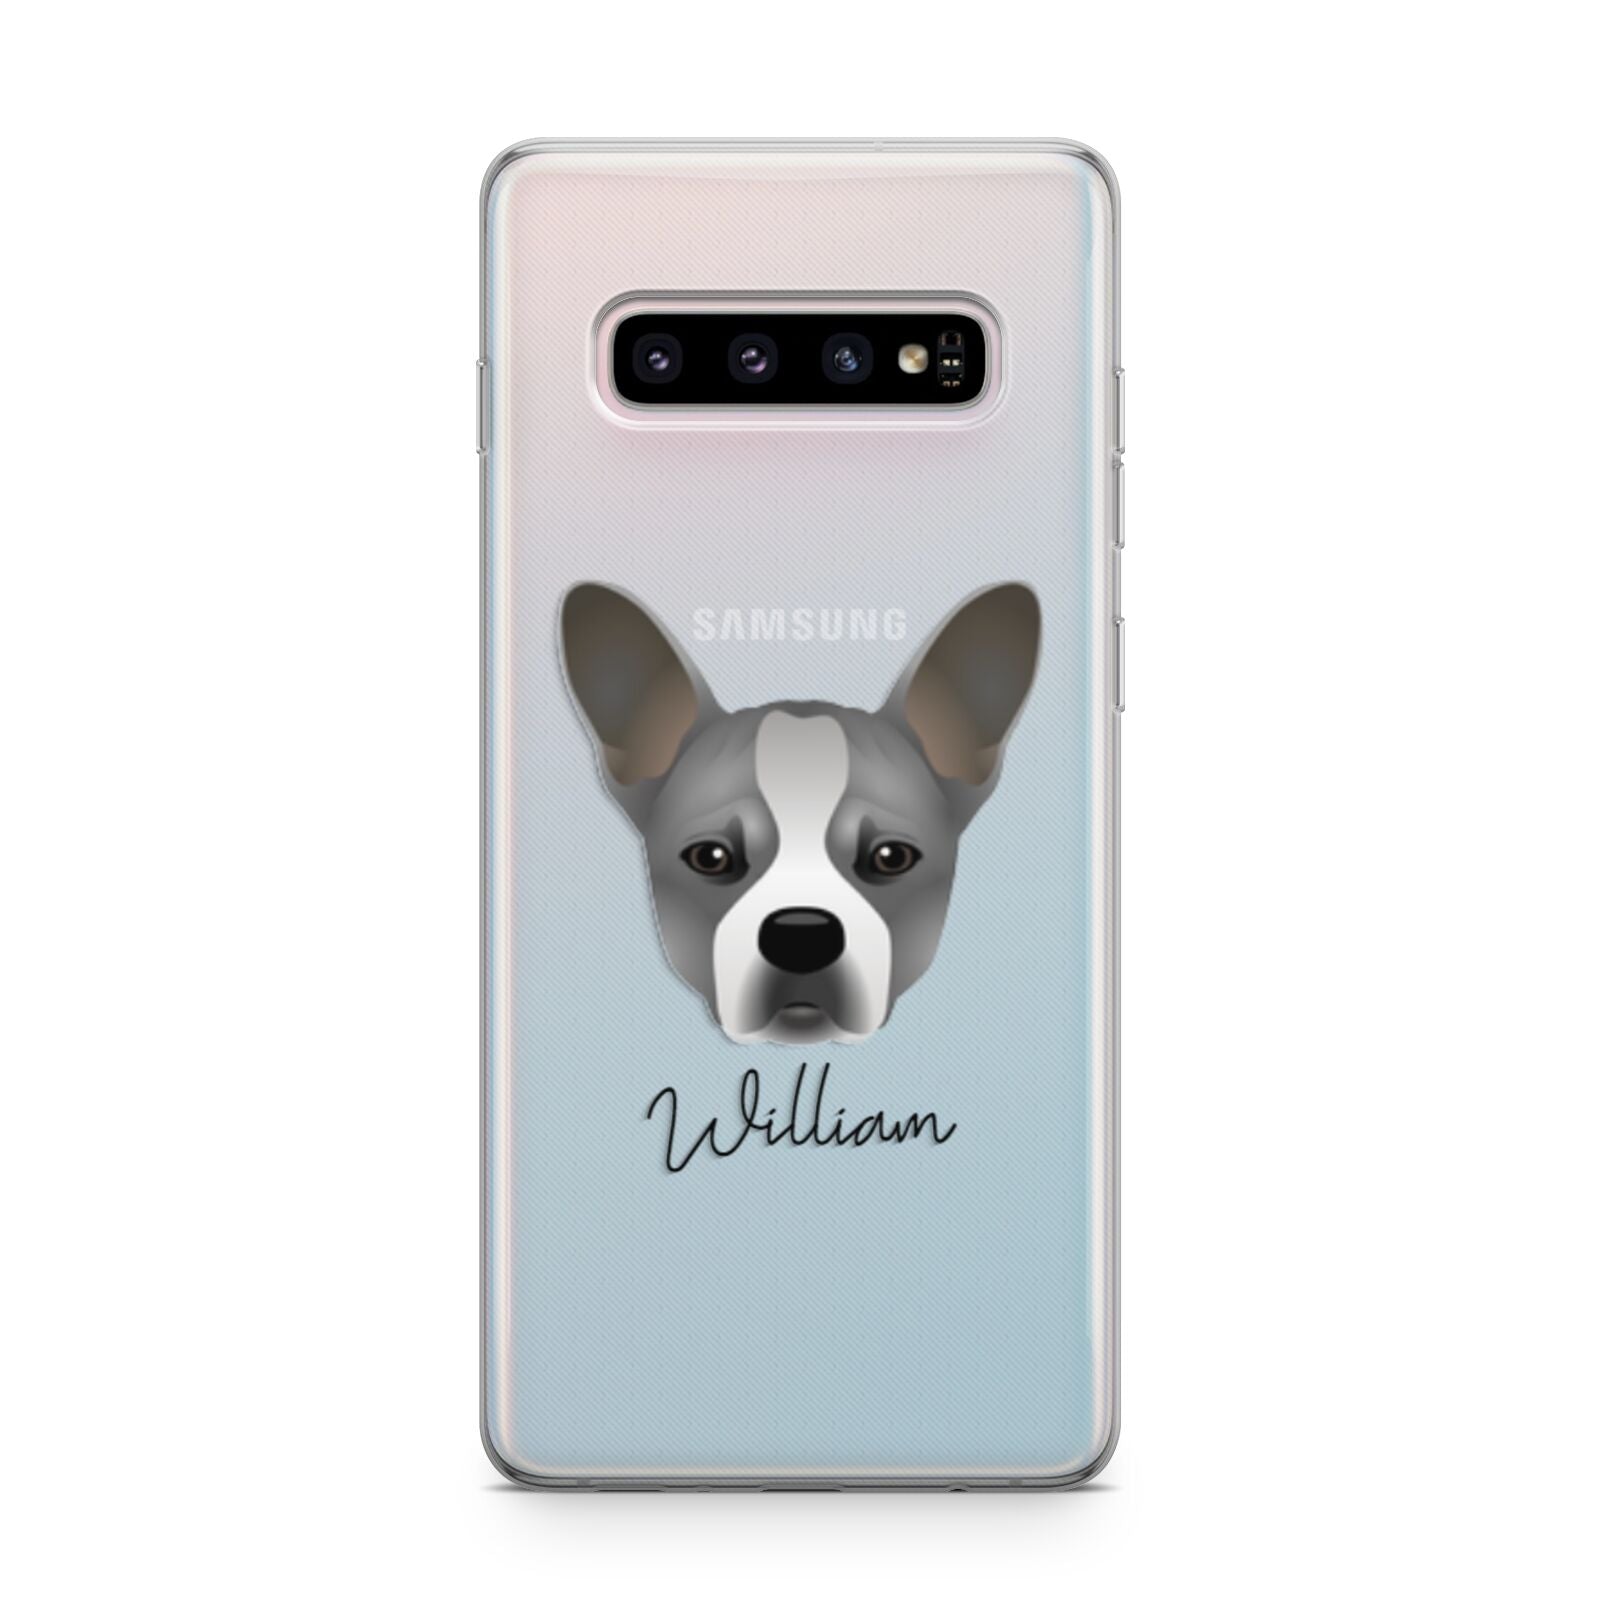 French Bull Jack Personalised Samsung Galaxy S10 Plus Case